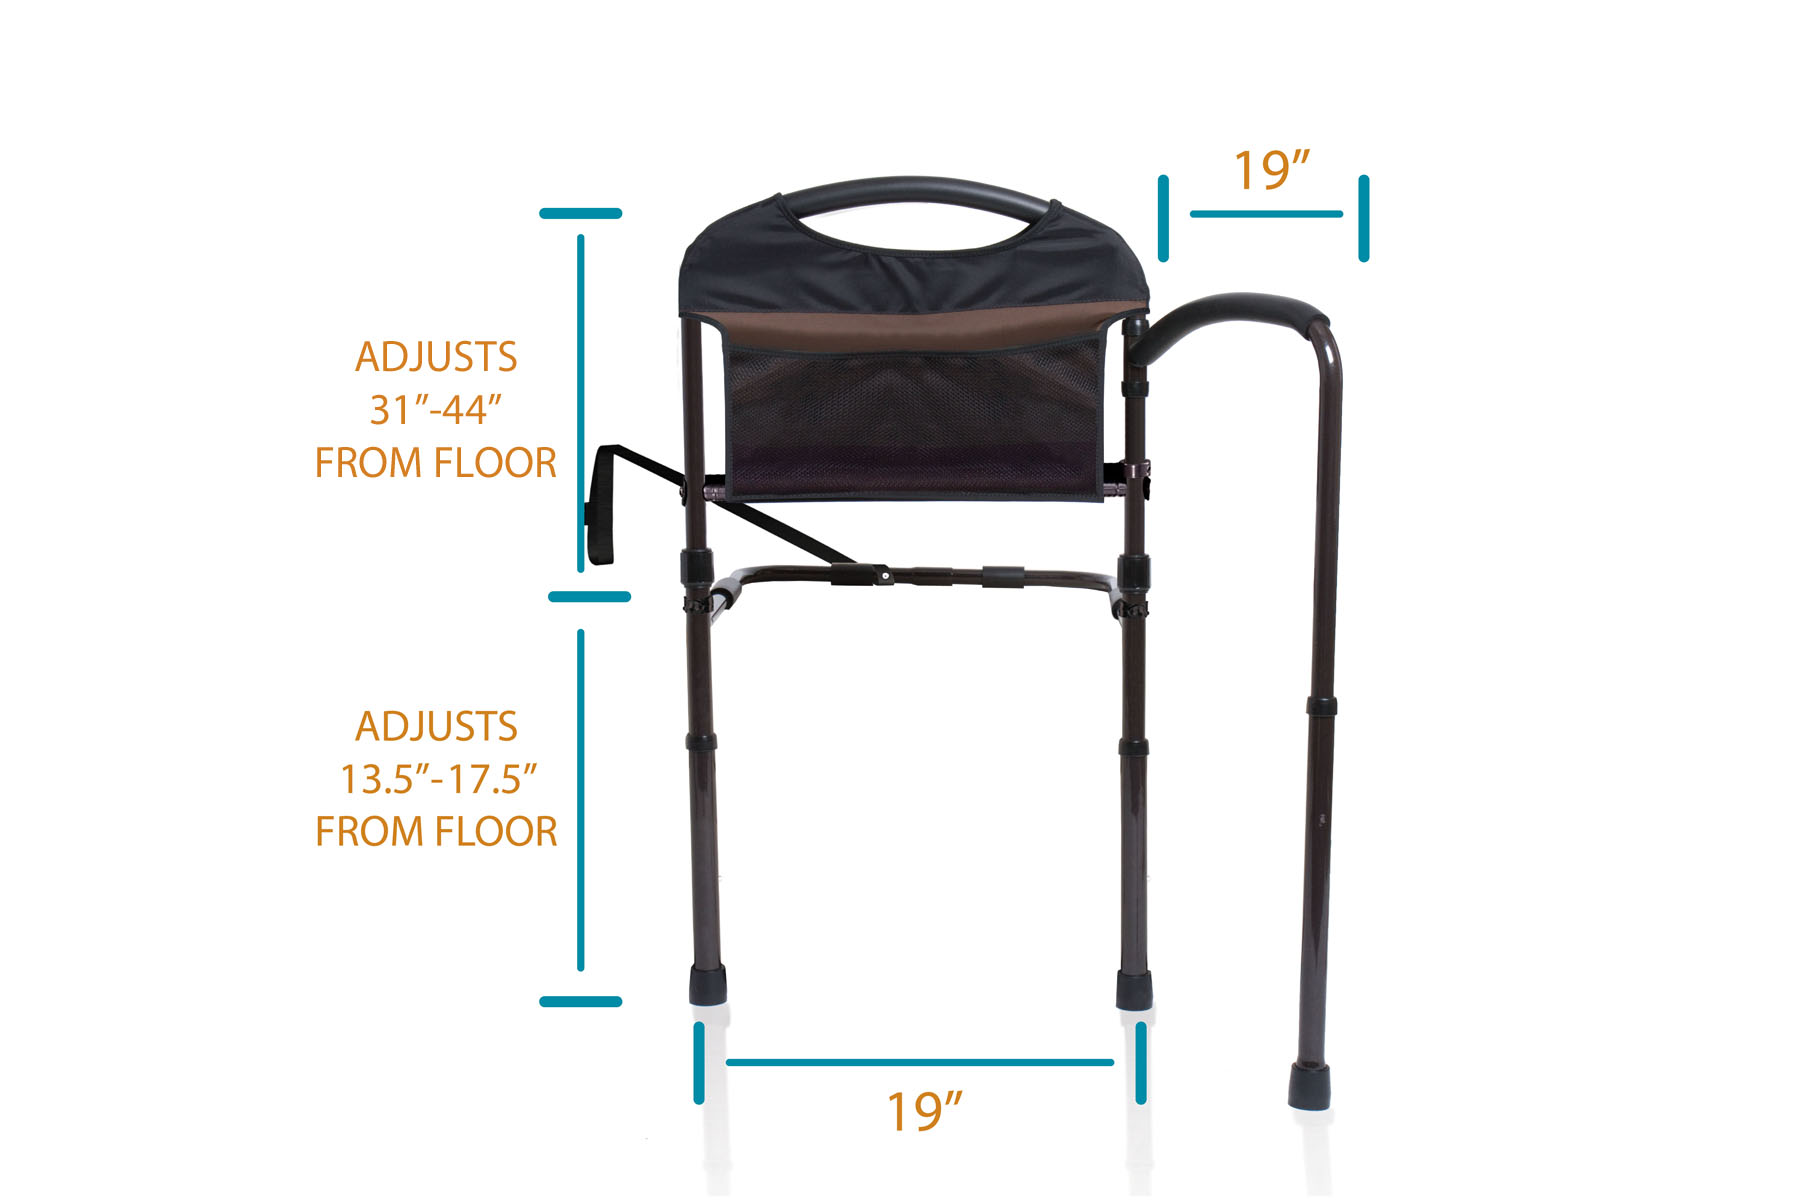 Mobility Rail - Bedside Safety Handle for Seniors